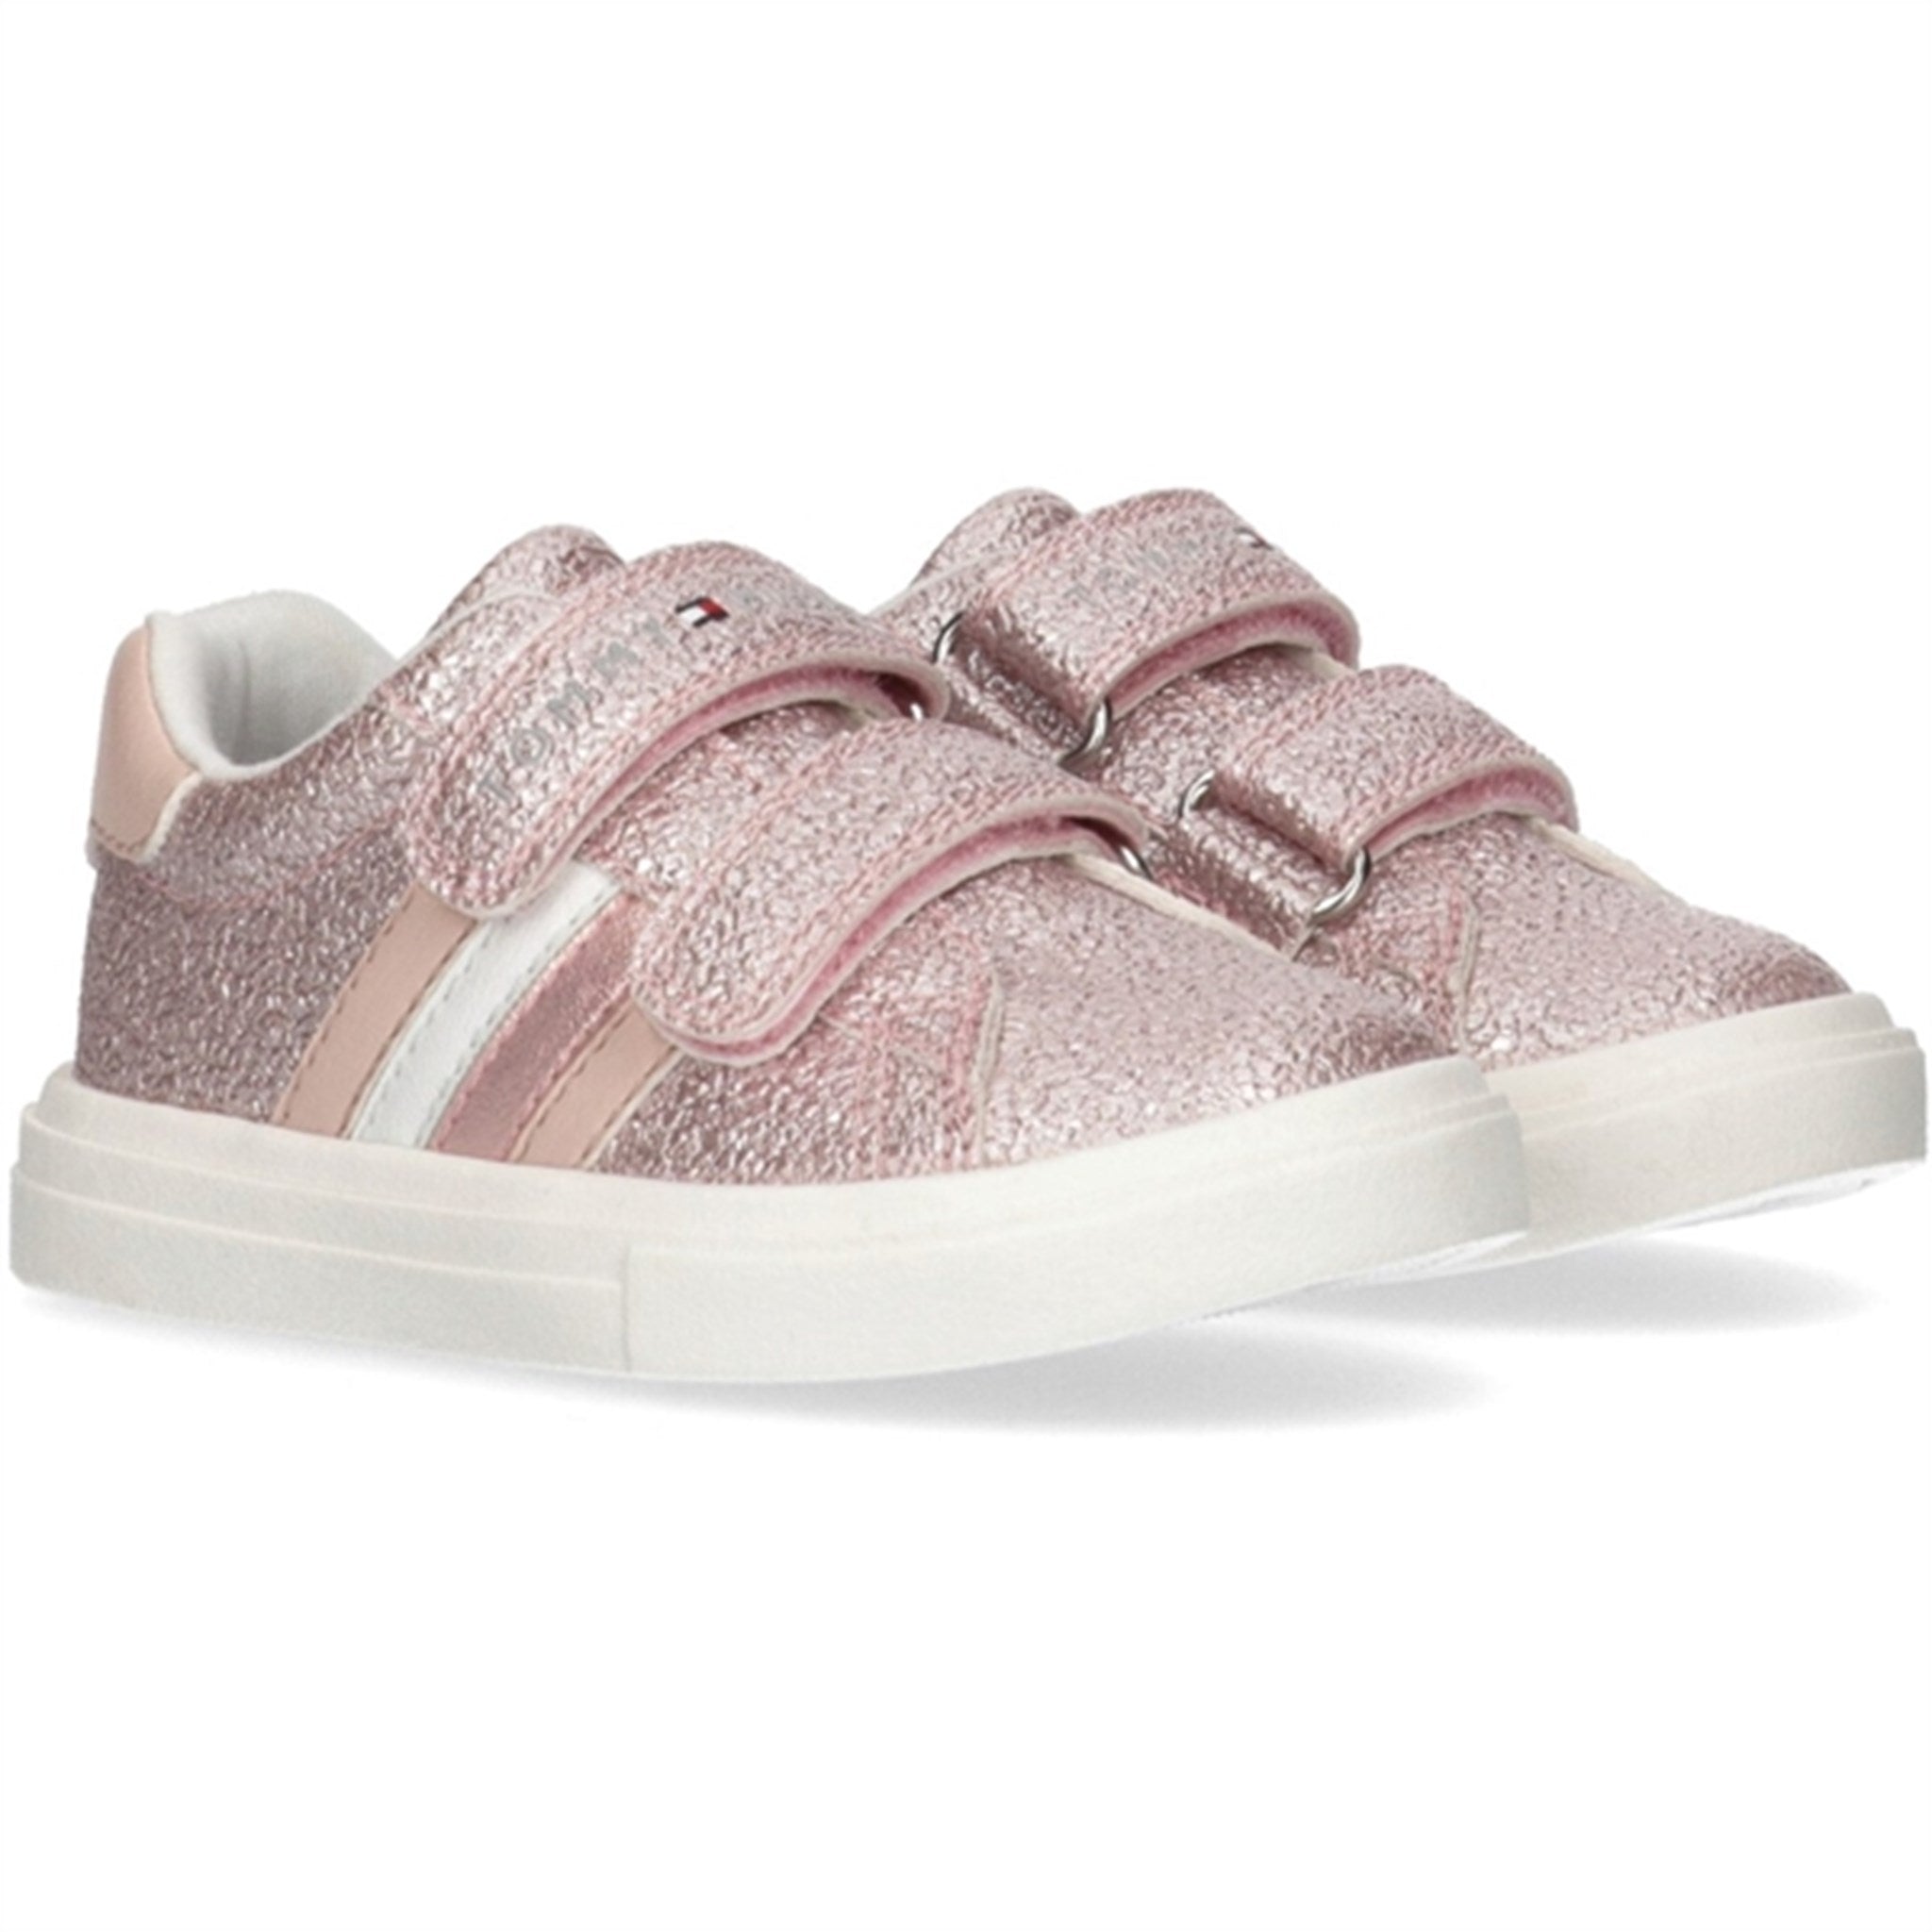 Tommy Hilfiger Stripes Low Cut Velcro Sneakers Pink 3